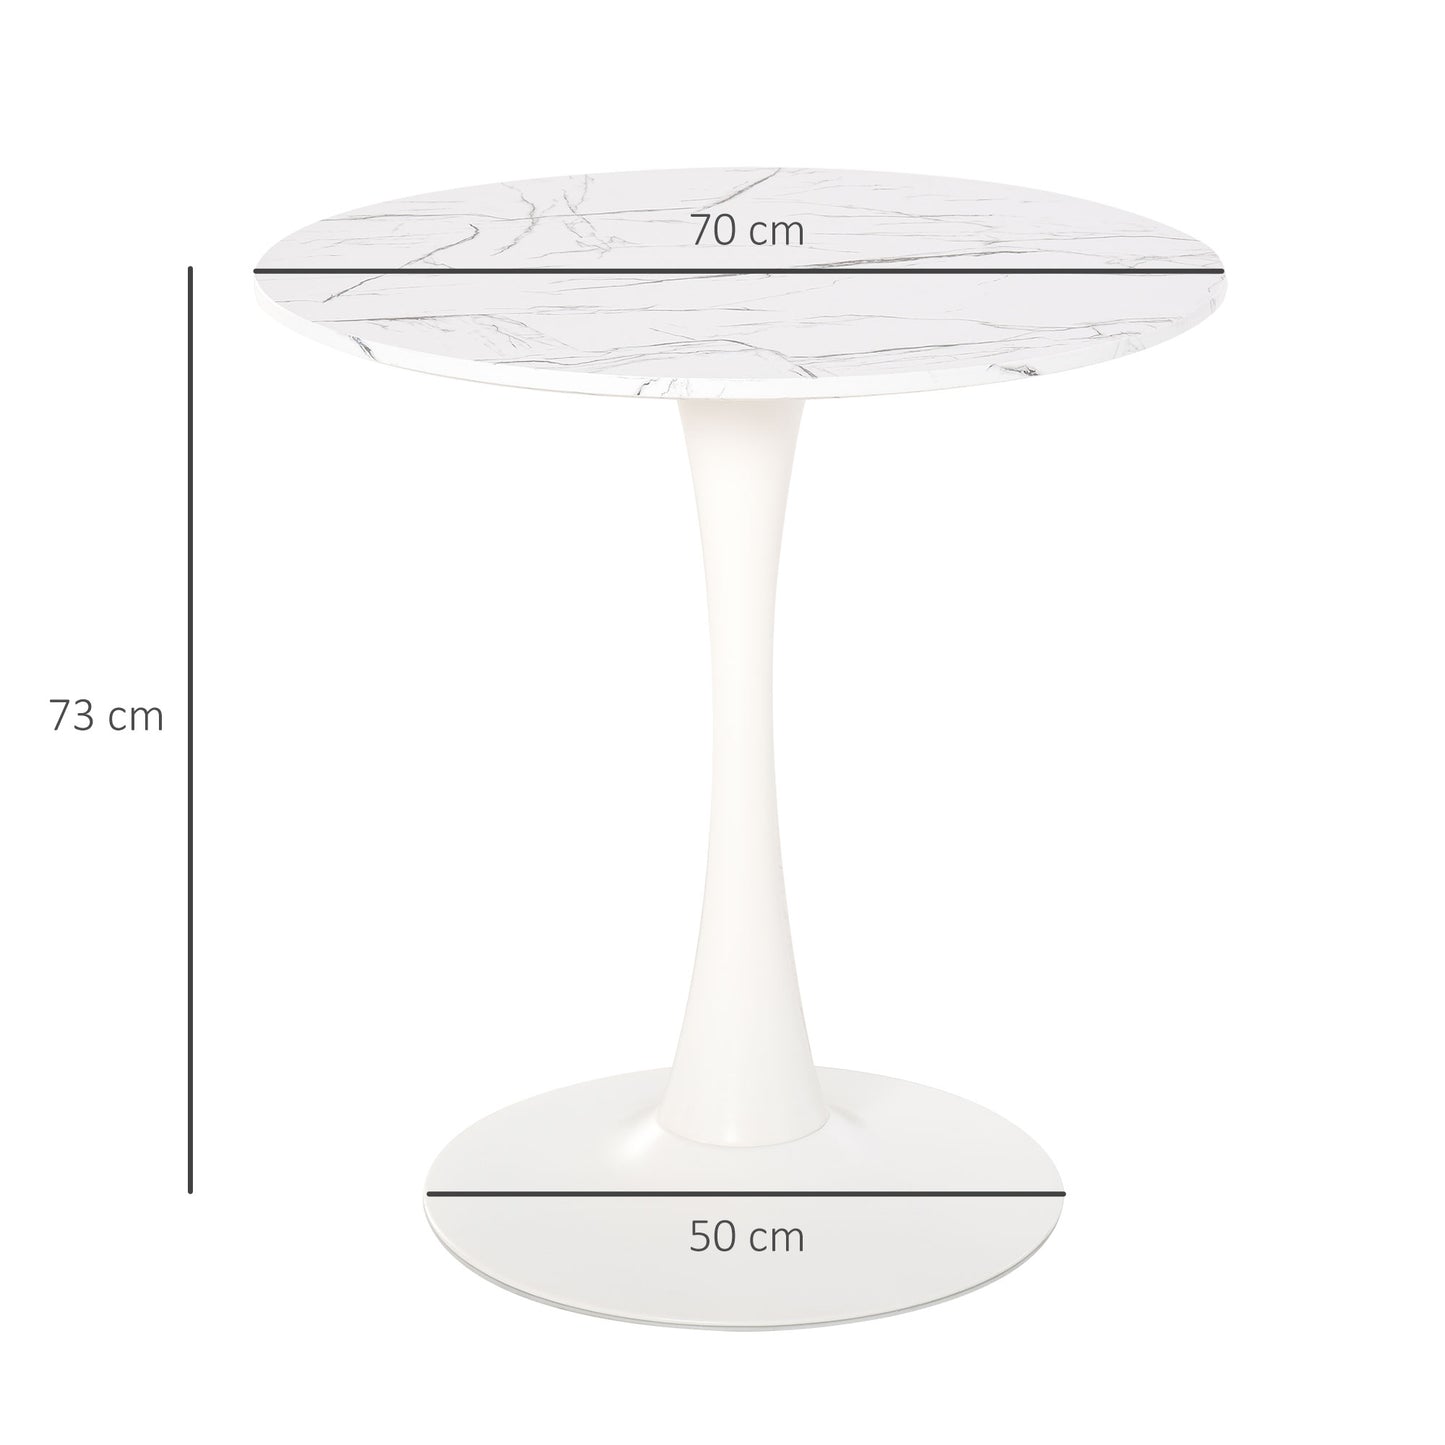 HOMCOM Modern Round Dining Table Leisure Coffee Bistro Table Metal Base Dining Room